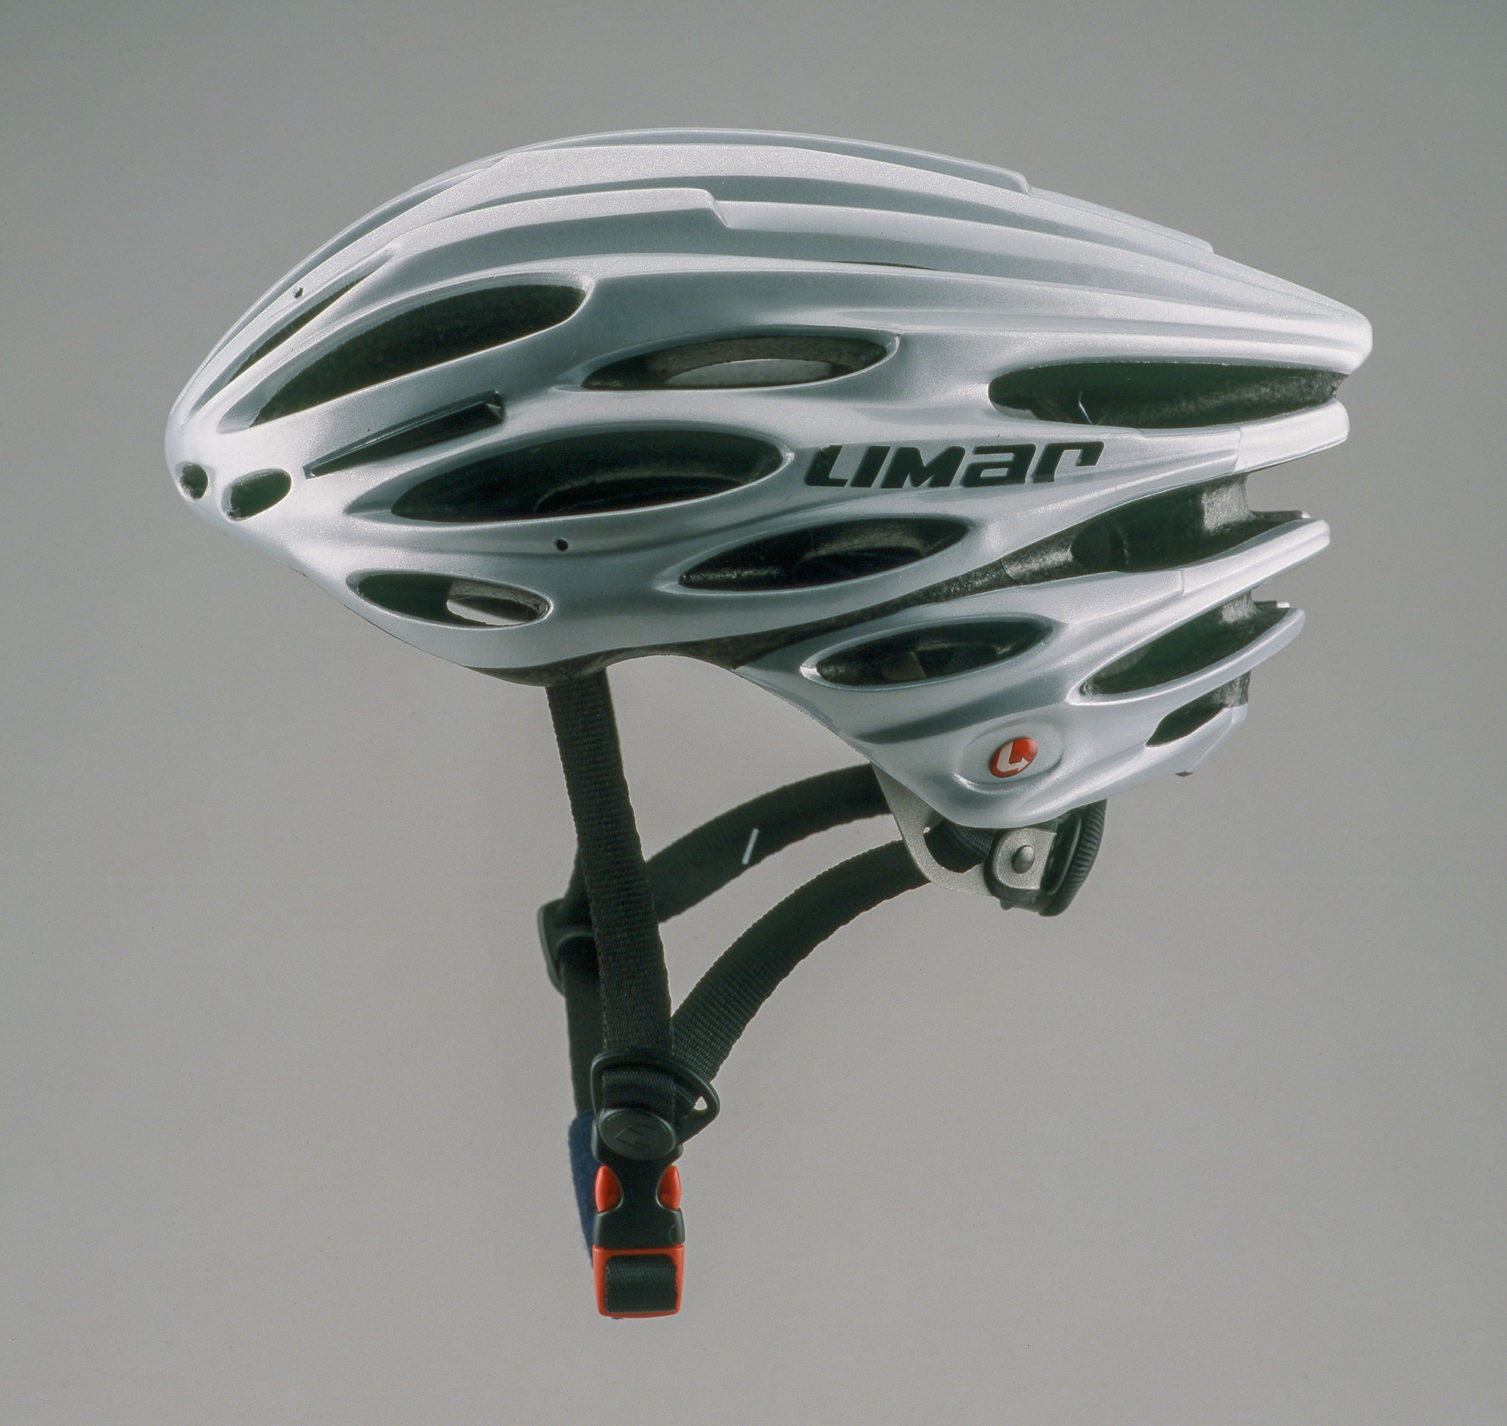 Silver-colored bicycle helmet in a sweeping teardrop shape with numerous ventilation openings and and black brim.